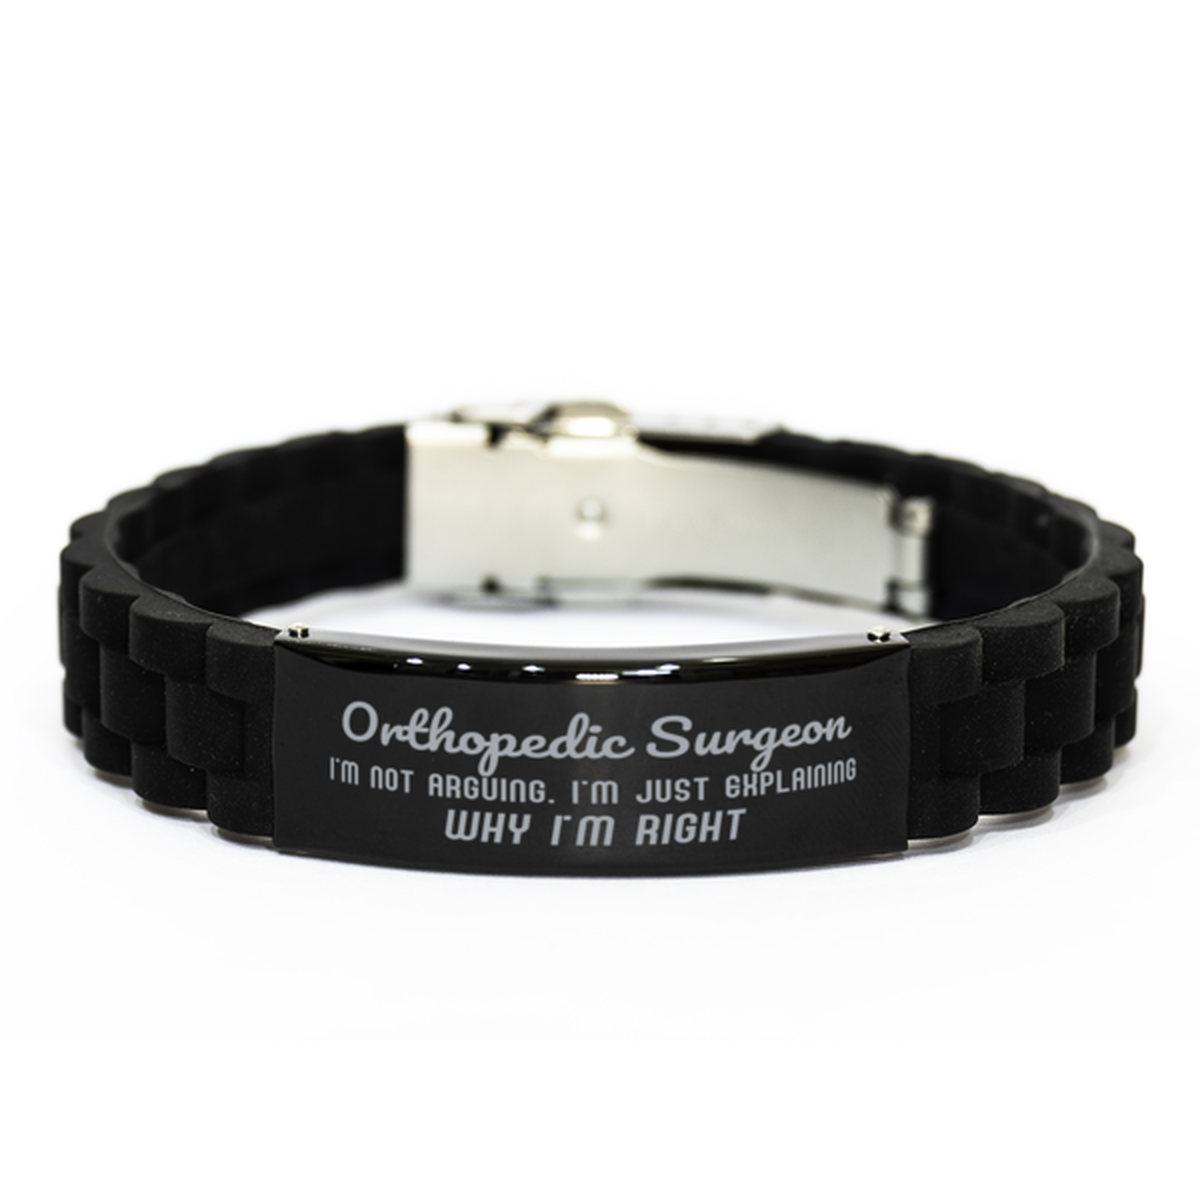 Orthopedic Surgeon I'm not Arguing. I'm Just Explaining Why I'm RIGHT Black Glidelock Clasp Bracelet, Funny Saying Quote Orthopedic Surgeon Gifts For Orthopedic Surgeon Graduation Birthday Christmas Gifts for Men Women Coworker